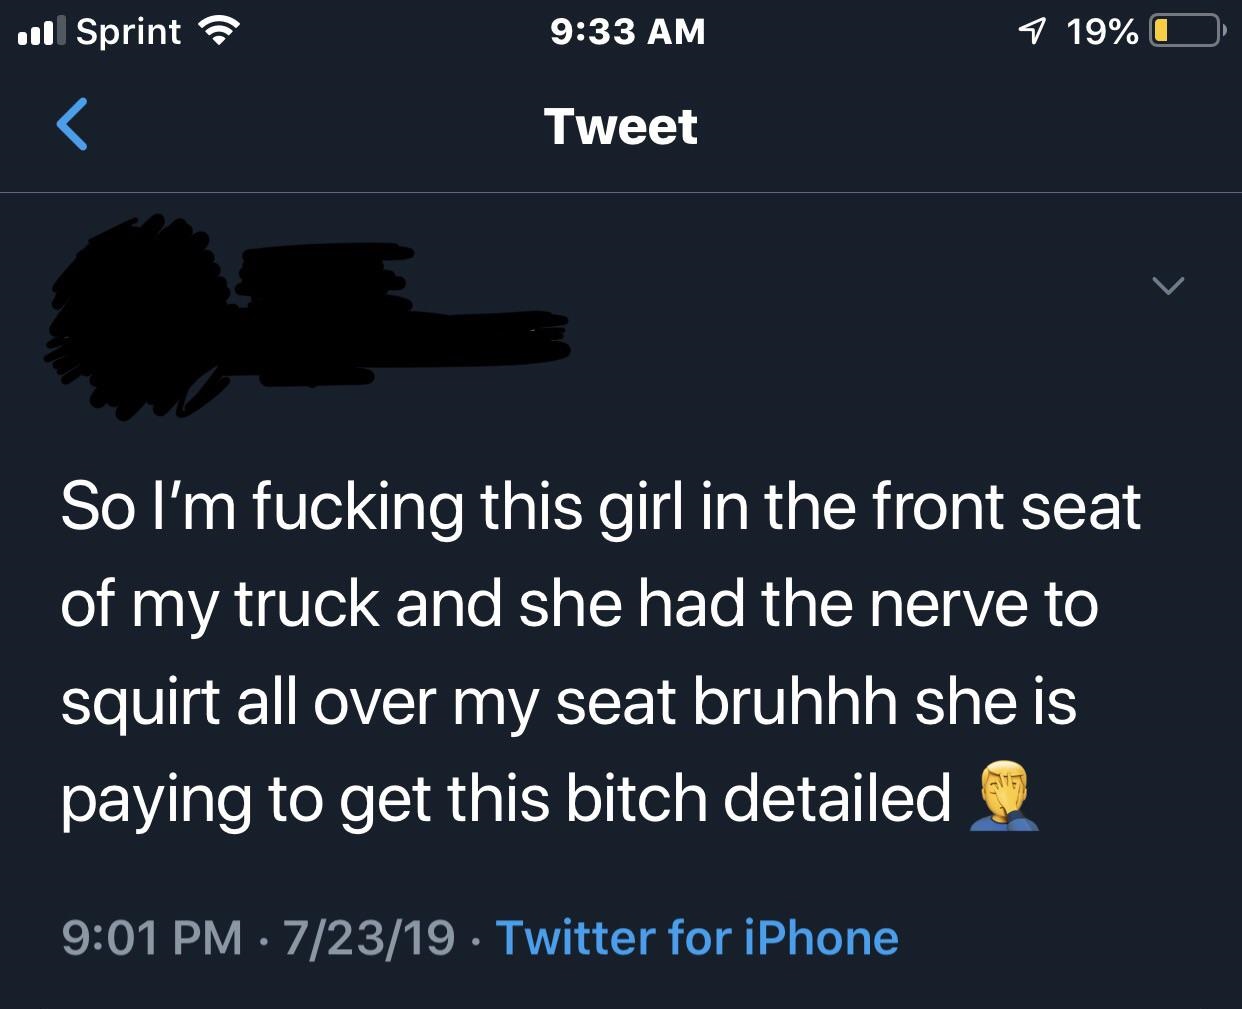 dia mundial de la tierra - 11 Sprint 7 19% O Tweet So I'm fucking this girl in the front seat of my truck and she had the nerve to squirt all over my seat bruhhh she is paying to get this bitch detailed 72319 Twitter for iPhone